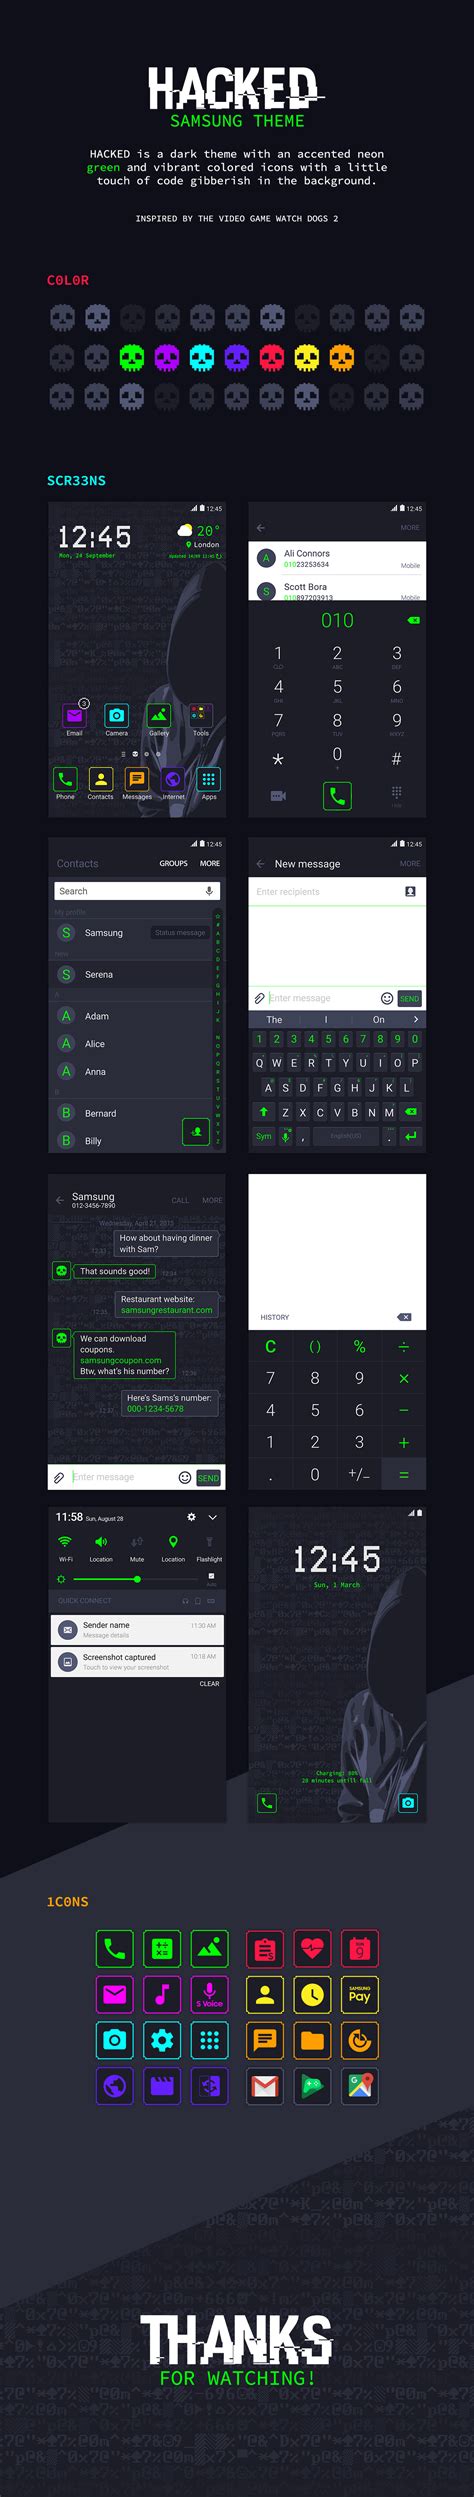 HACKED - Samsung Theme Proposal on Behance